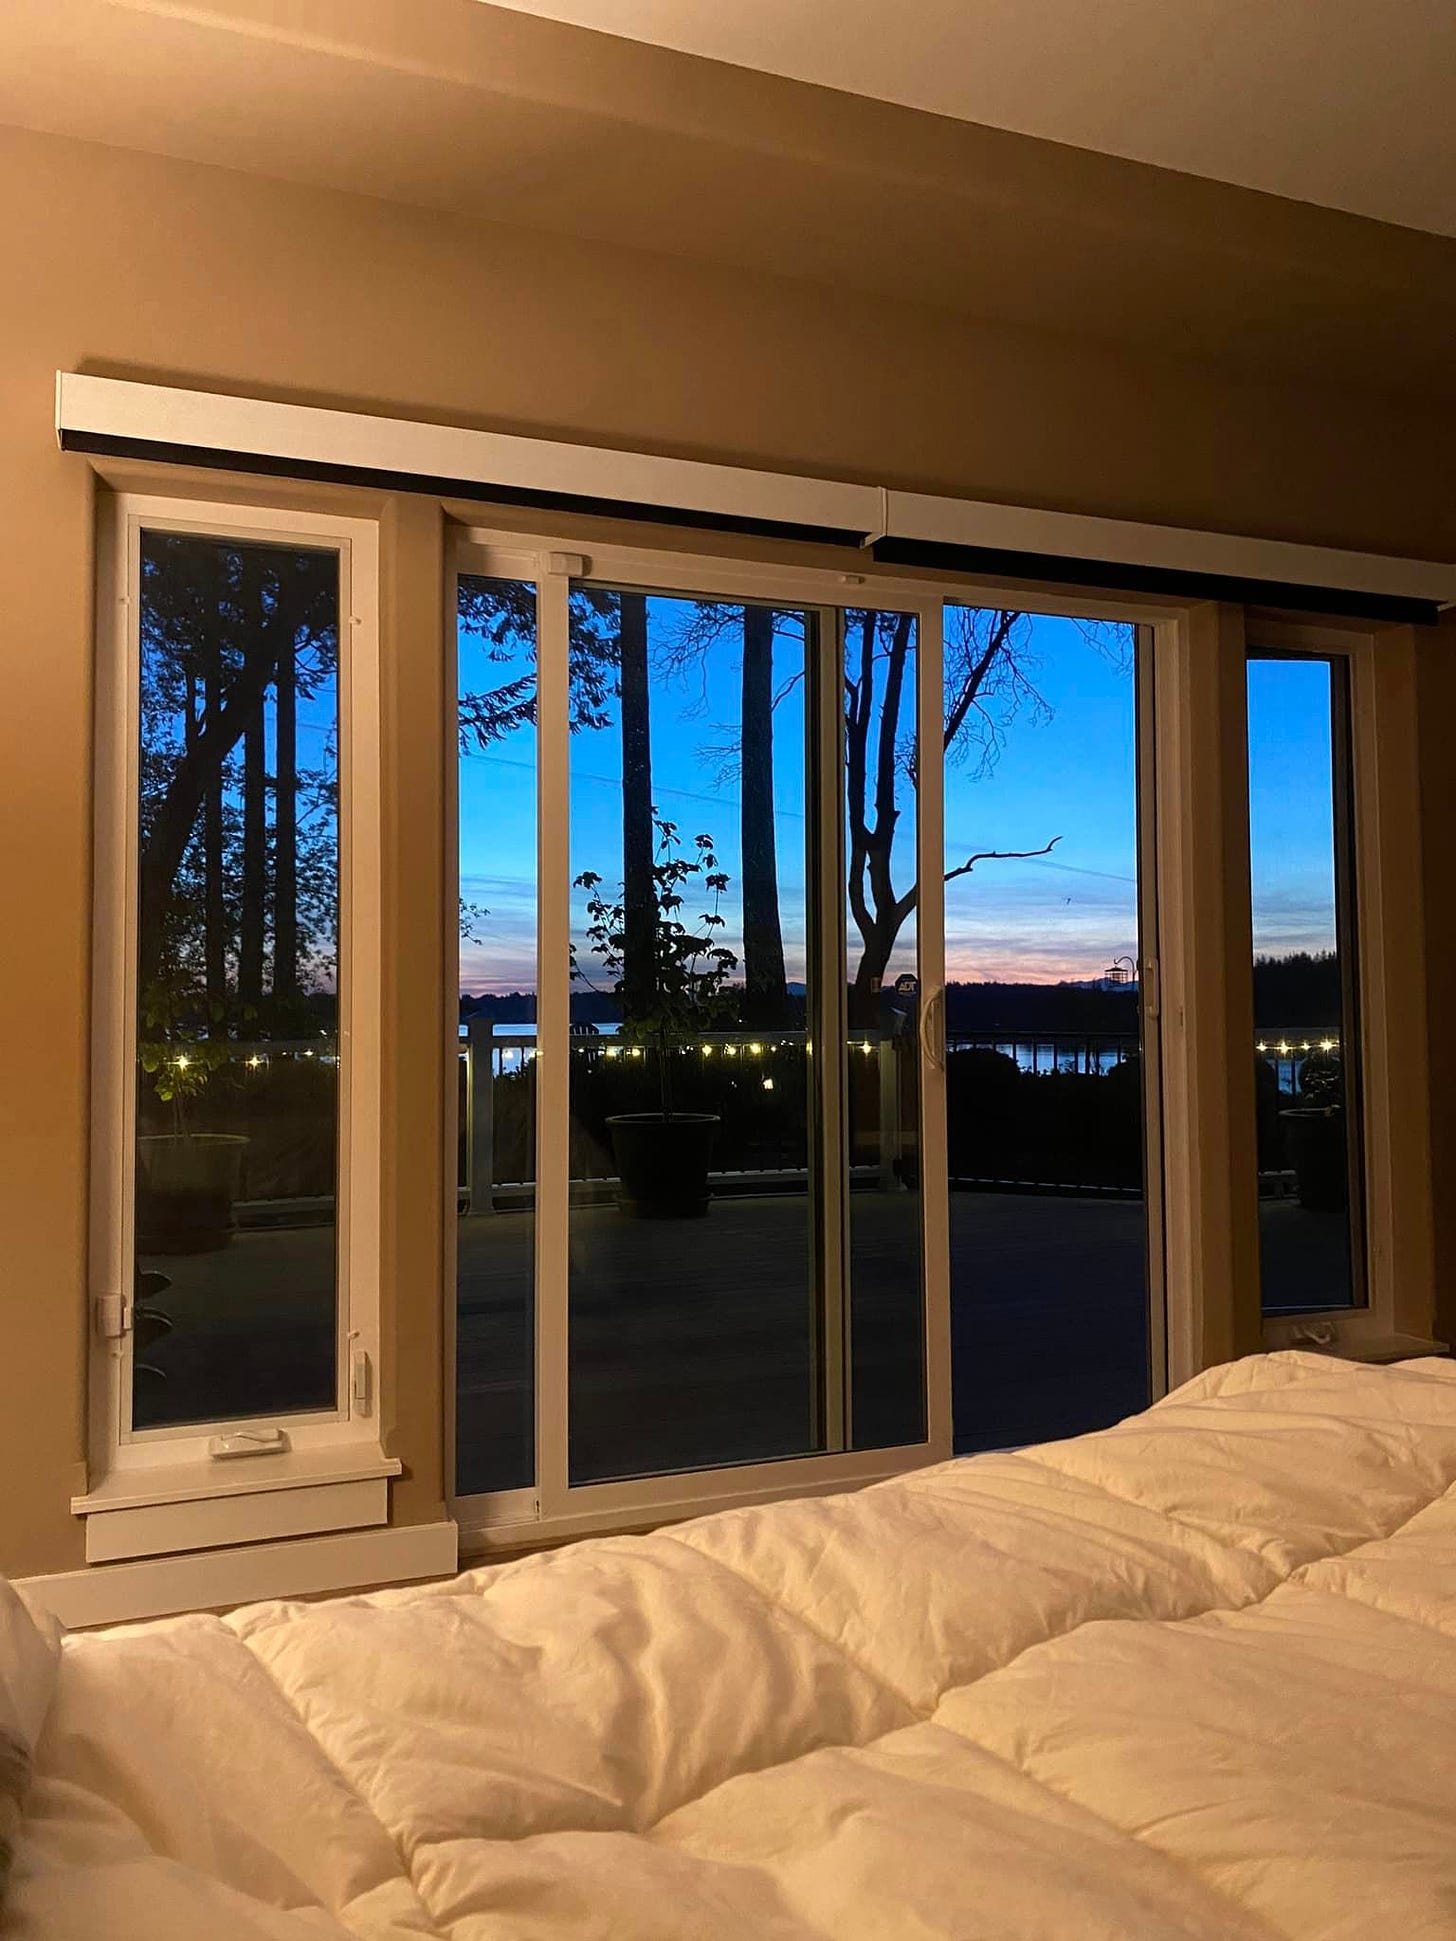 May be an image of bedroom, twilight, indoors and sliding door